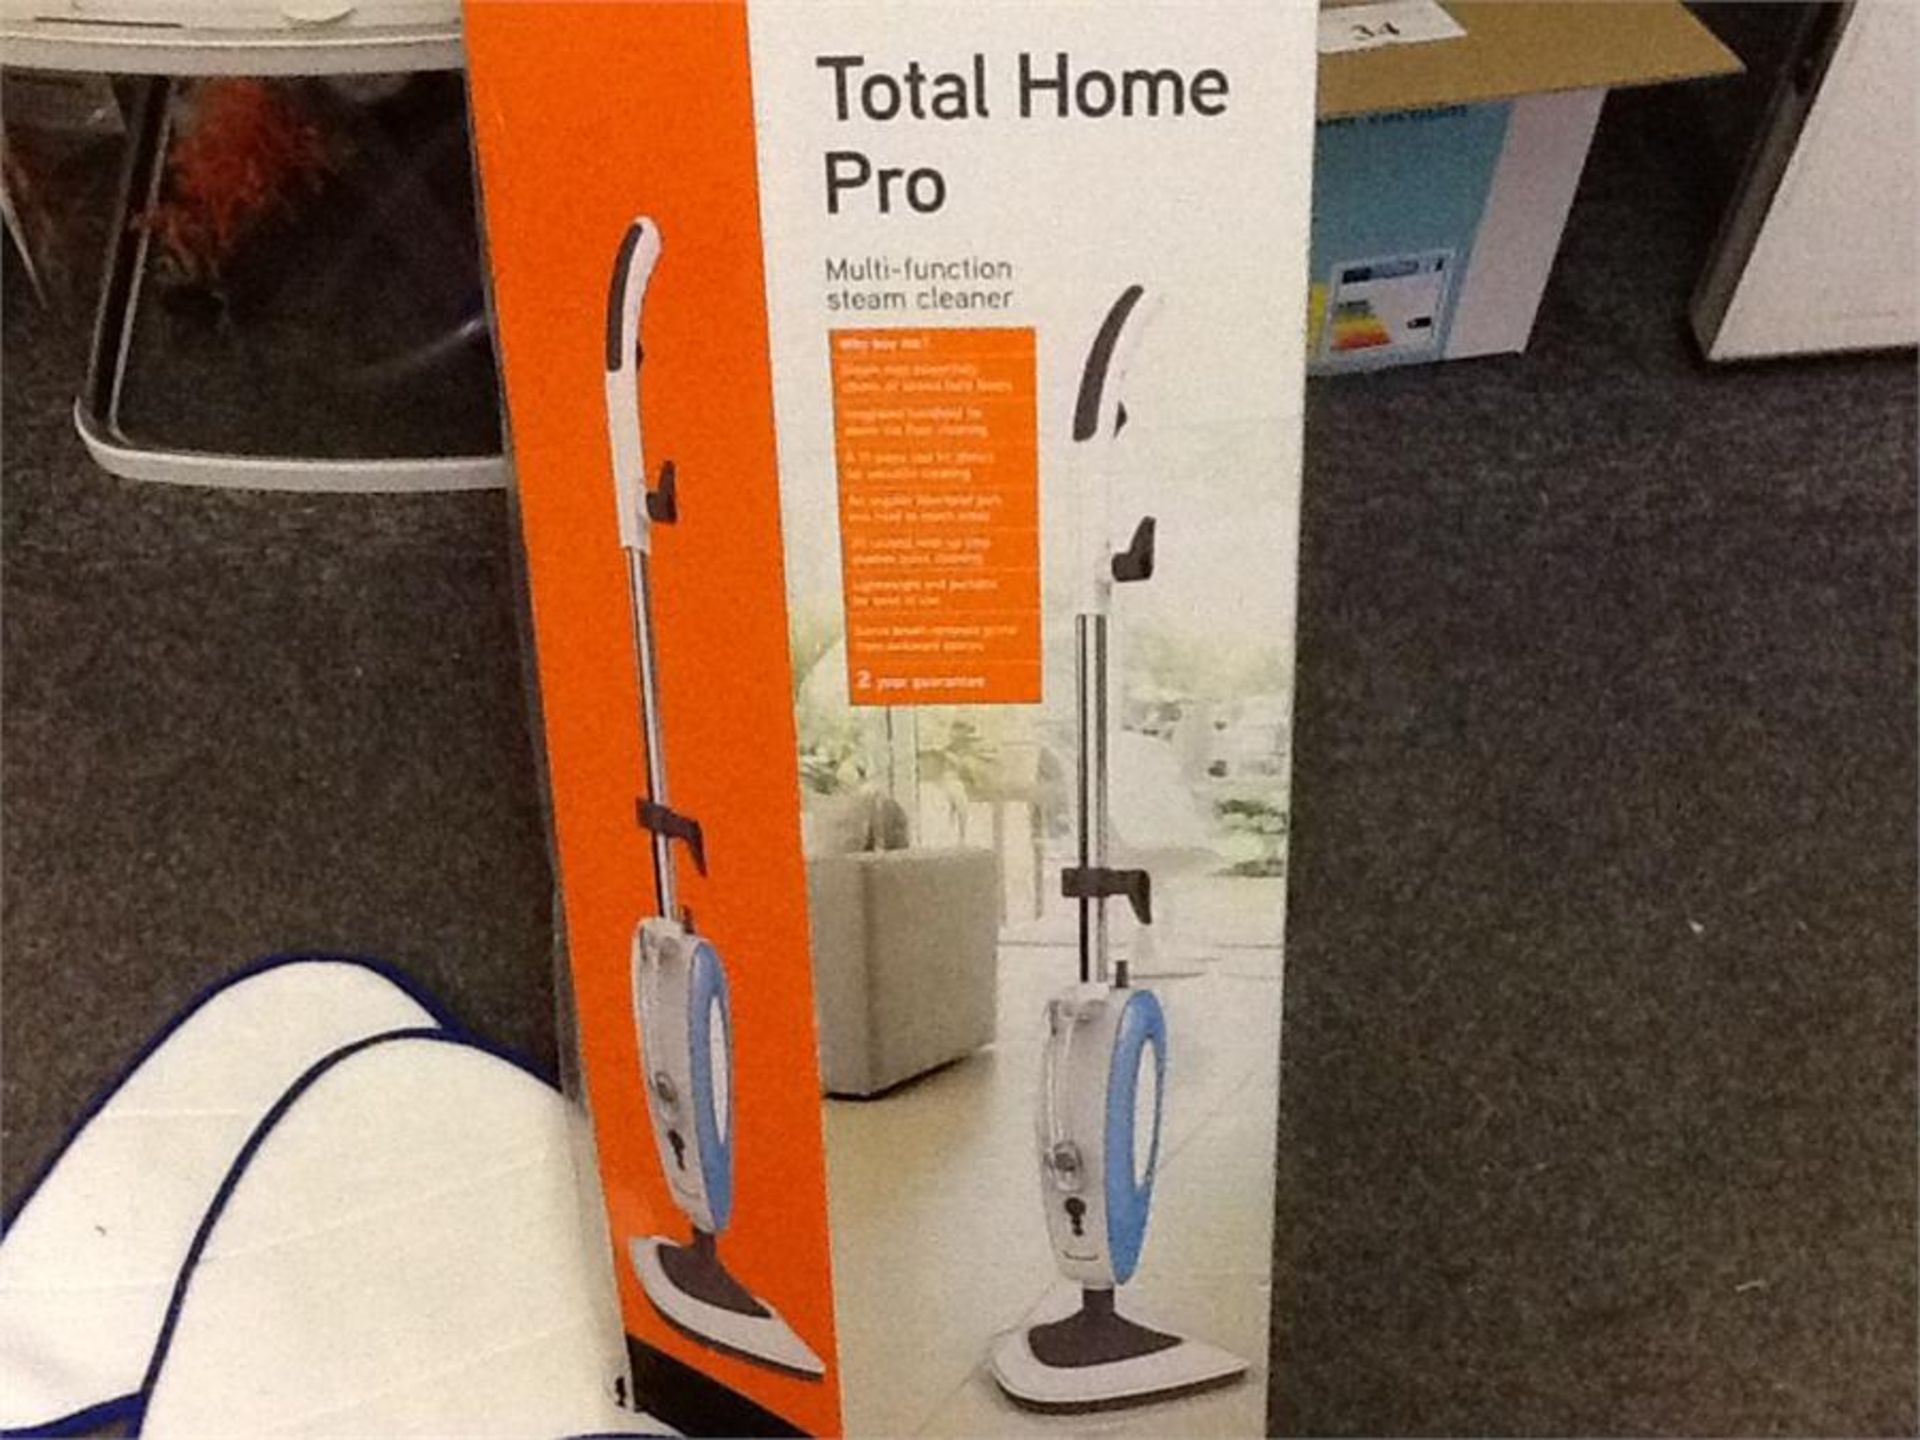 Vax total home pro multi-function steam cleaner.working. Boxed - Image 2 of 2